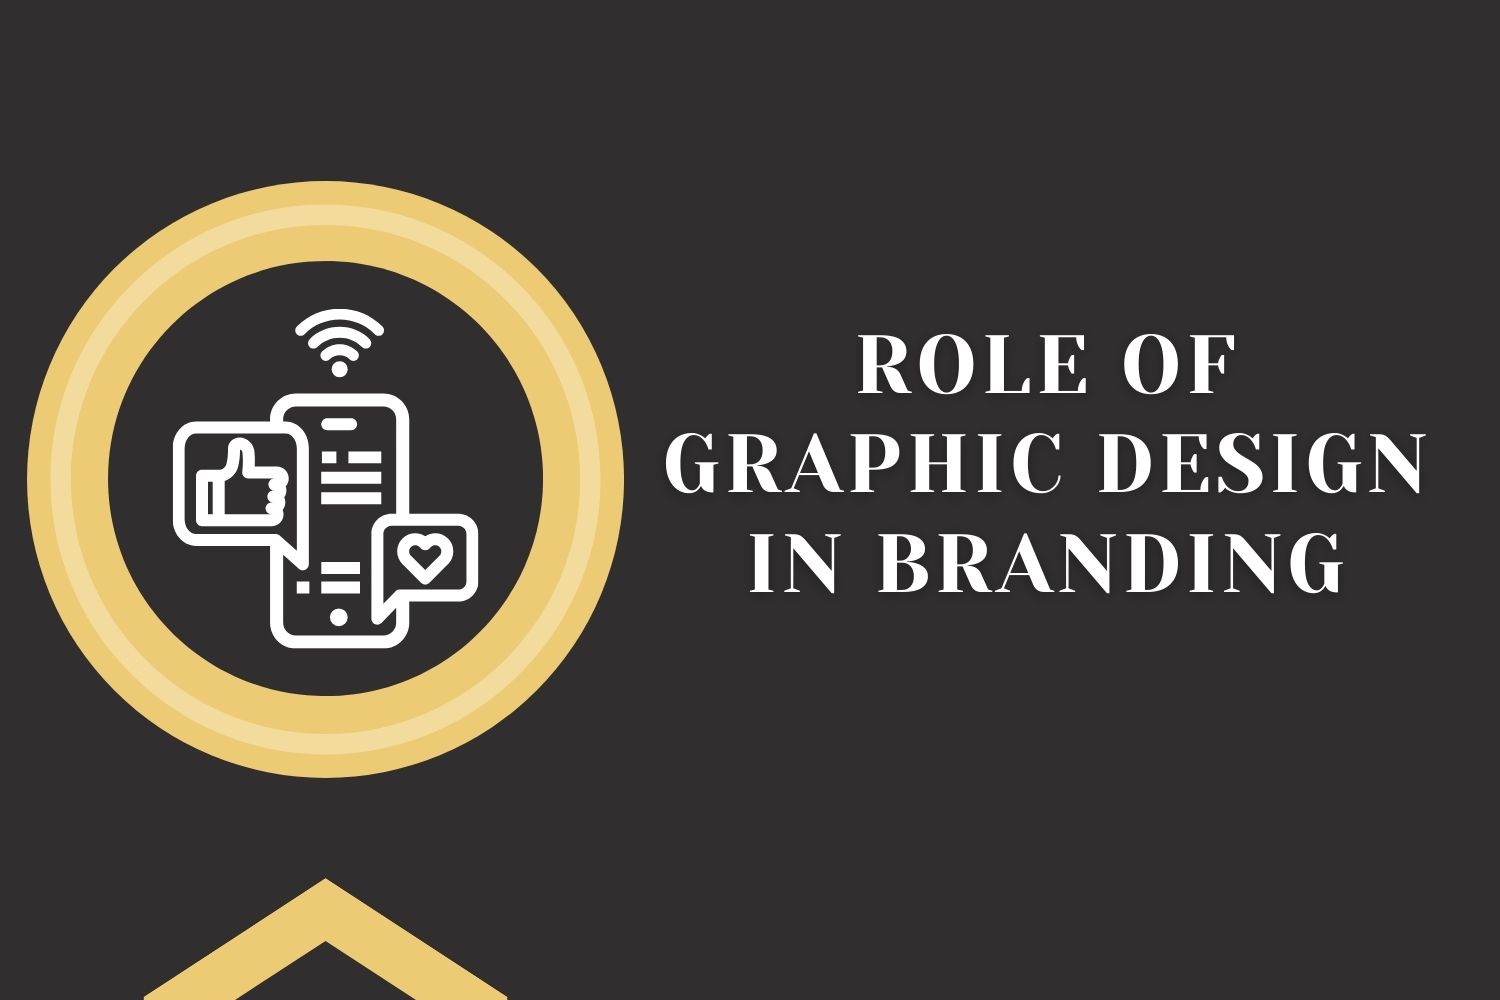 role of Graphic Design in Branding